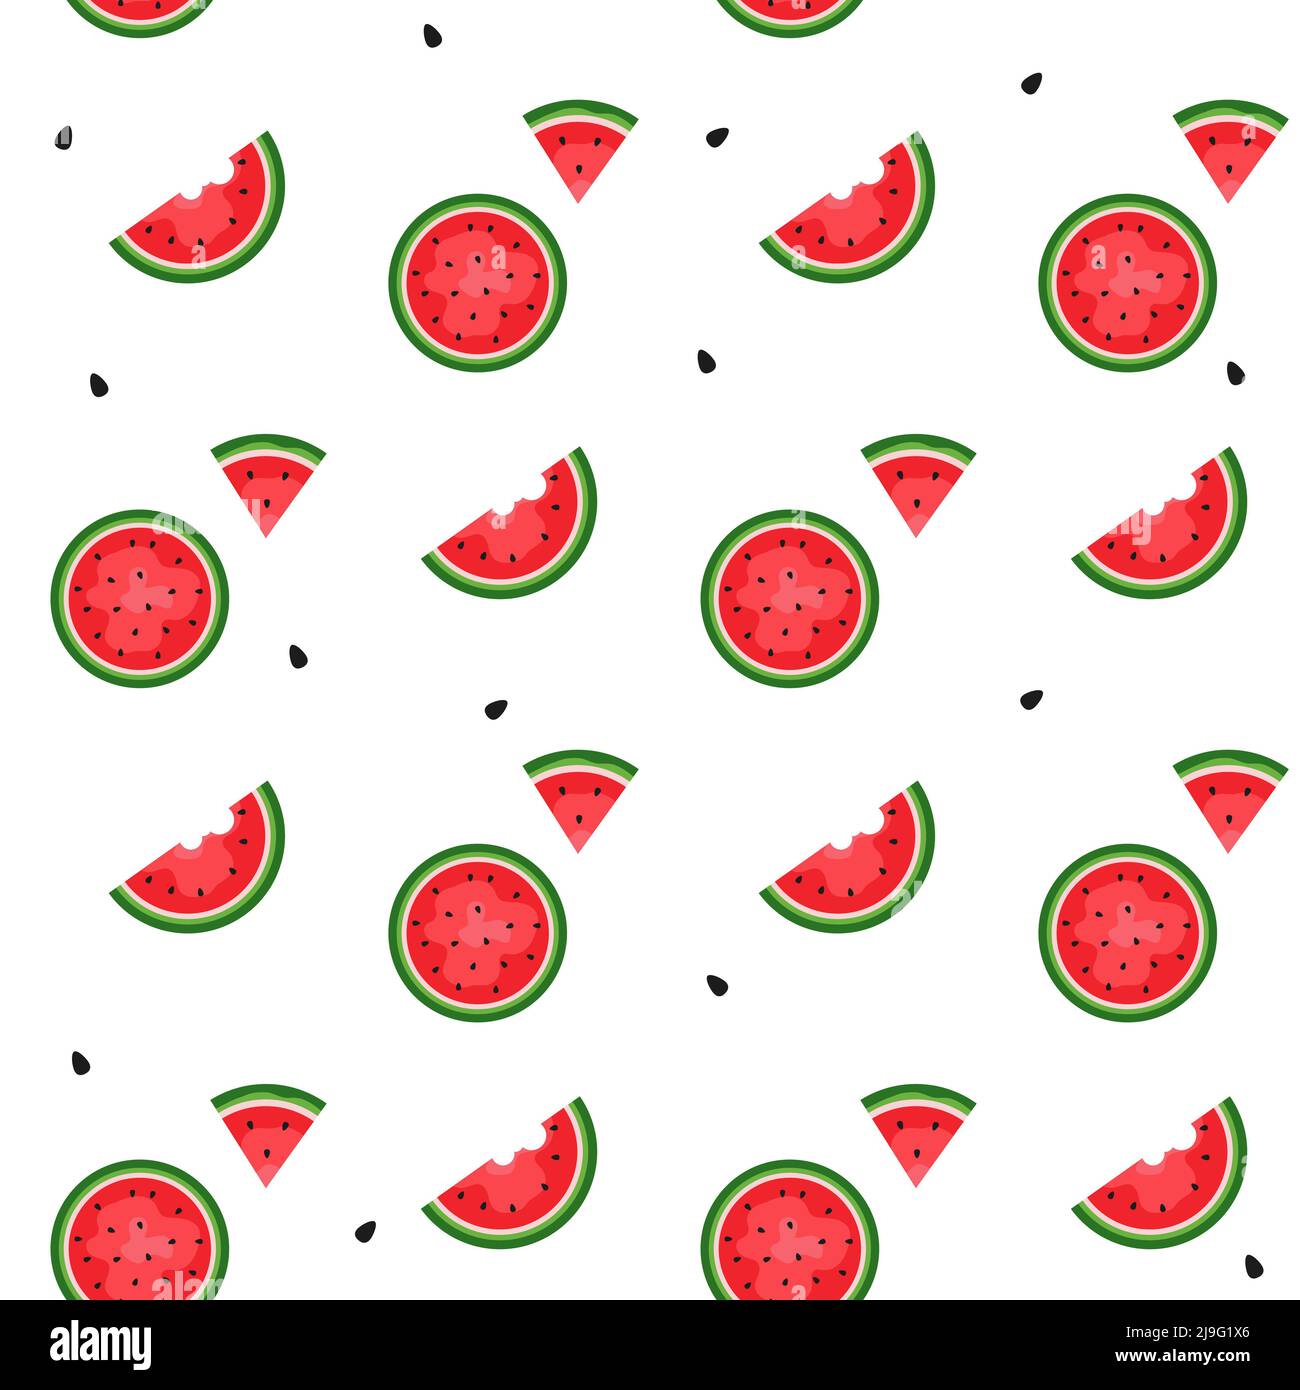 Watermelon background and seamless pattern, flat design of green leaves and flower and watermelon juice illustration, Fresh and juicy fruit concept of Stock Photo